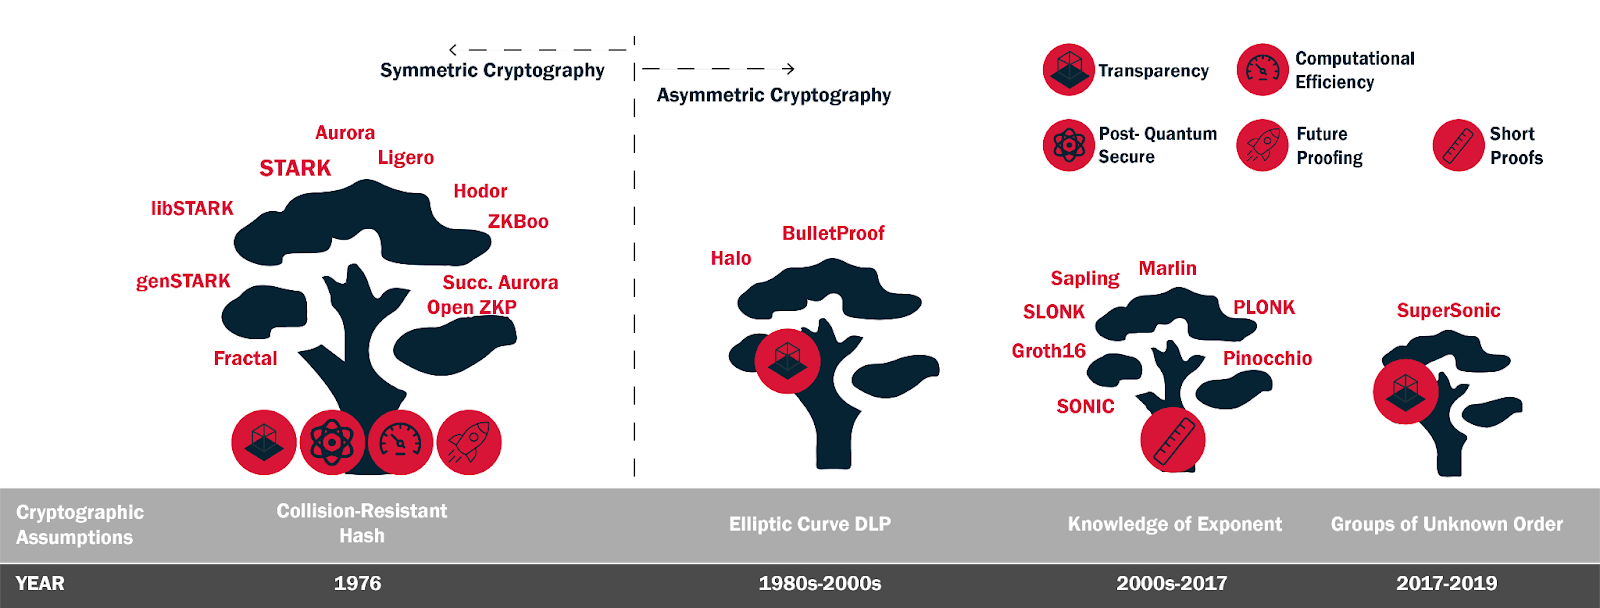 Cryptographic Assumptions over the years